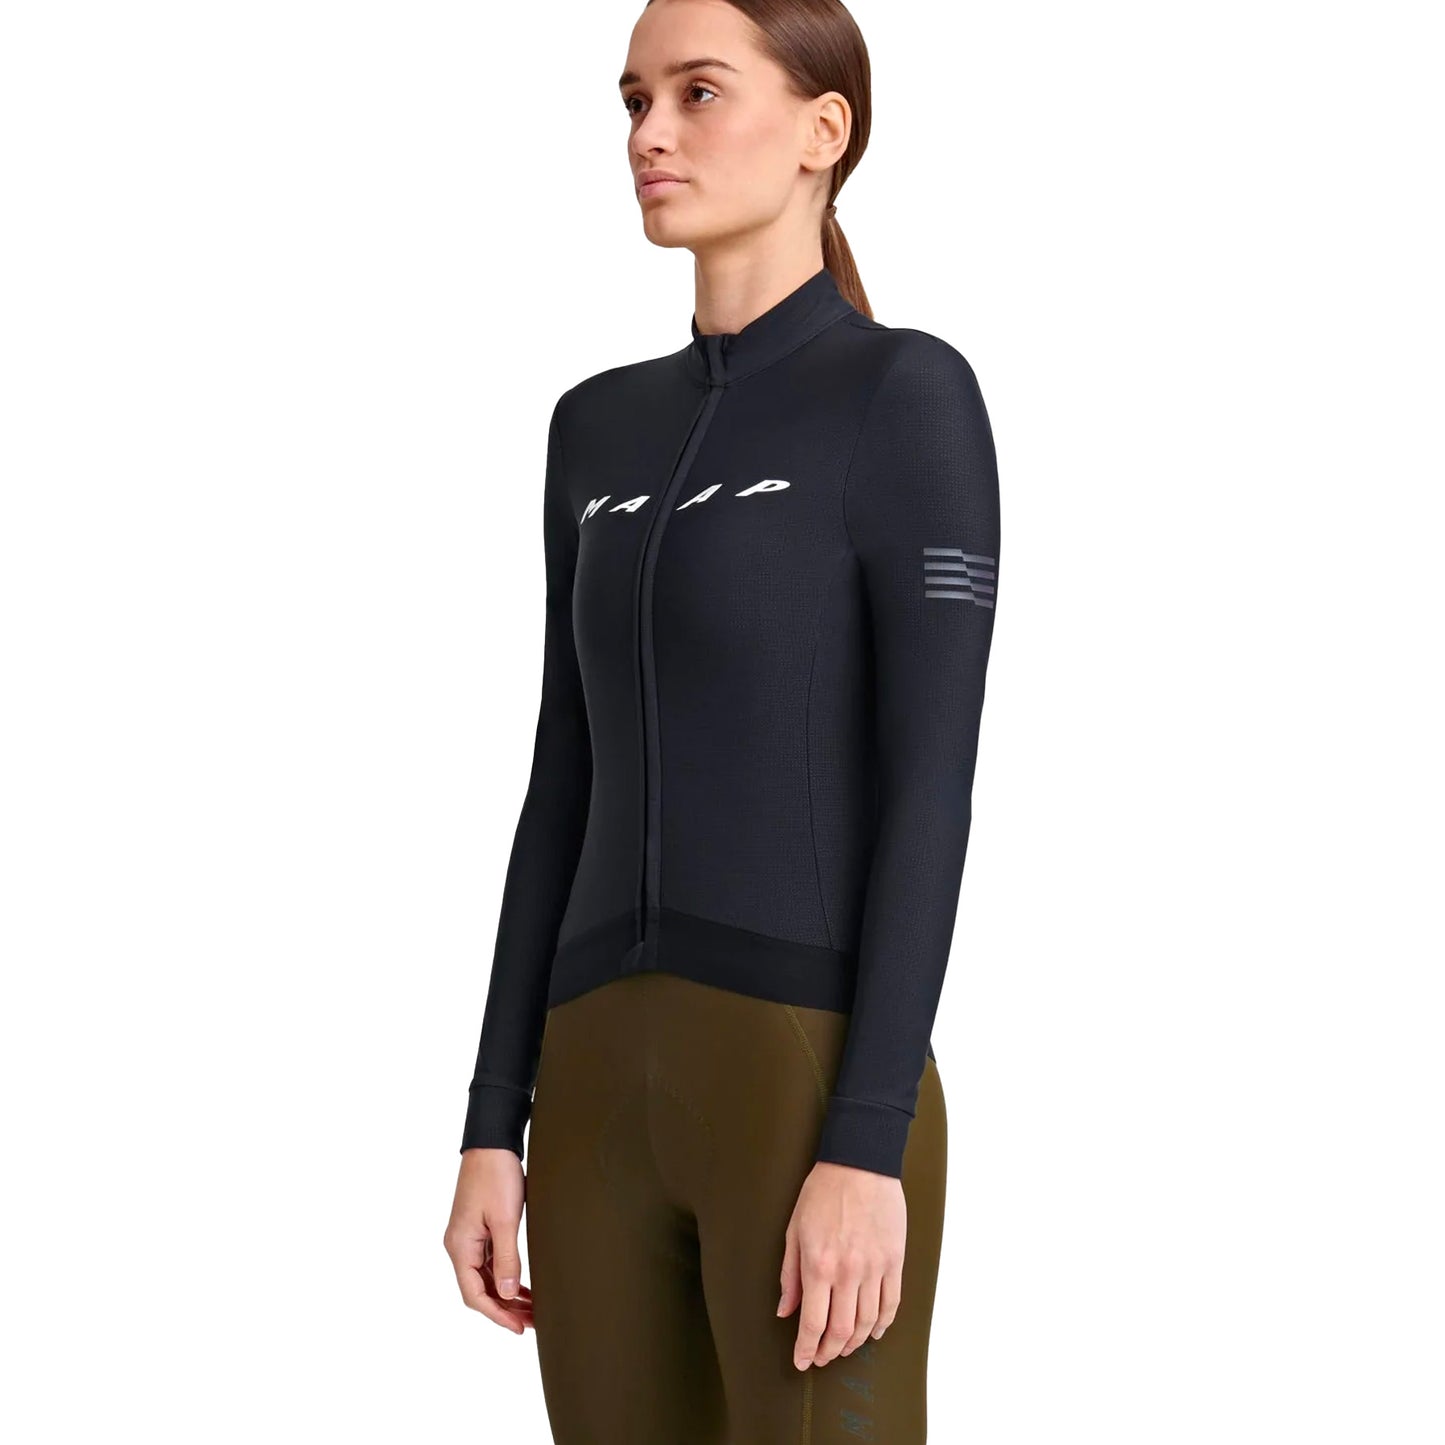 MAAP Evade Thermal LS Women Jersey AW2023 - Black – Velodrom CC